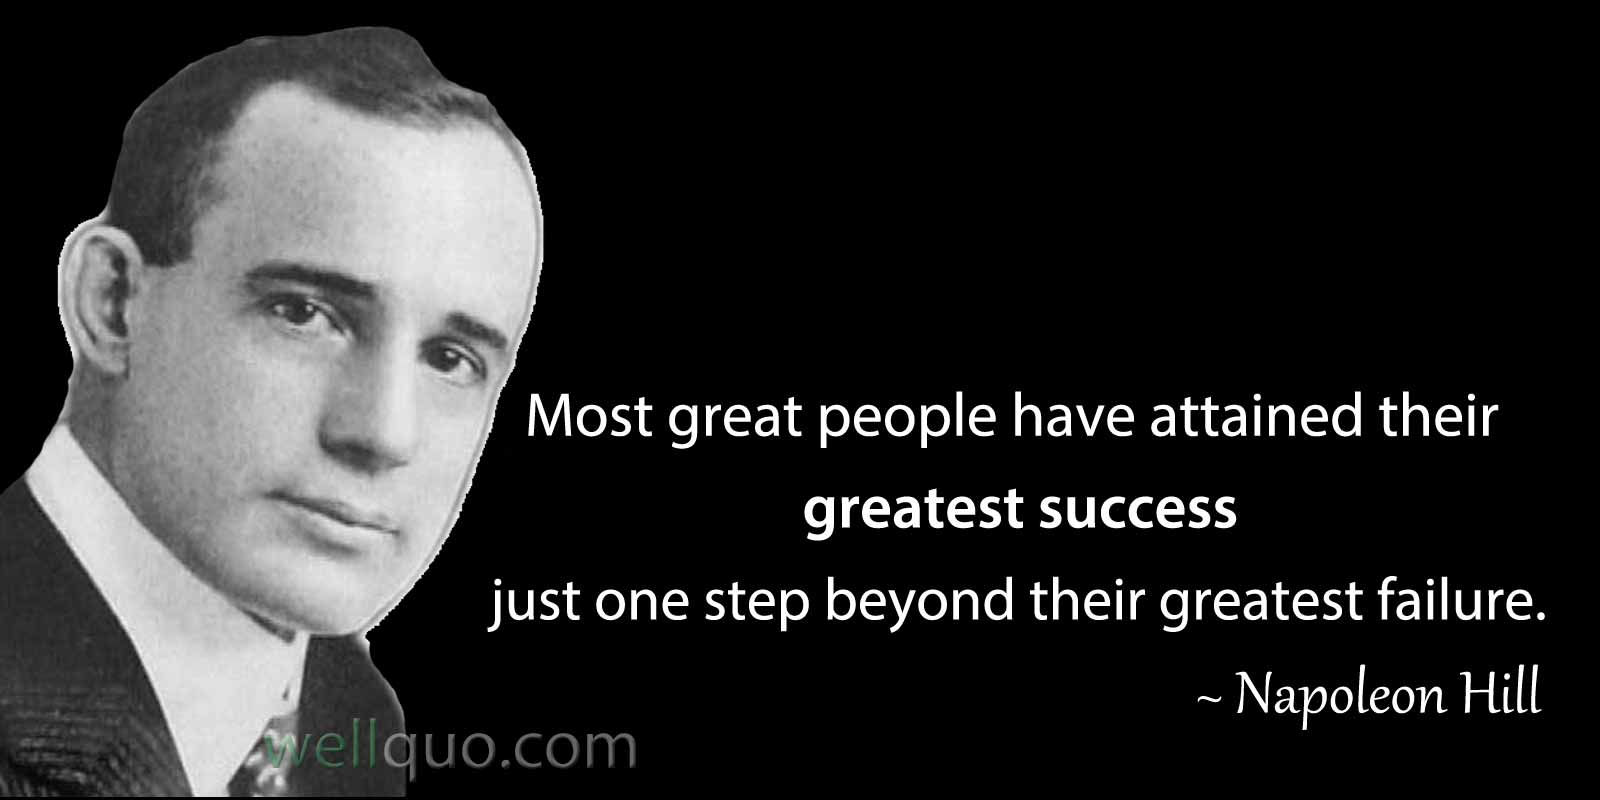 Napoleon Hill Quotes Makes your Desire to Success - Well Quo